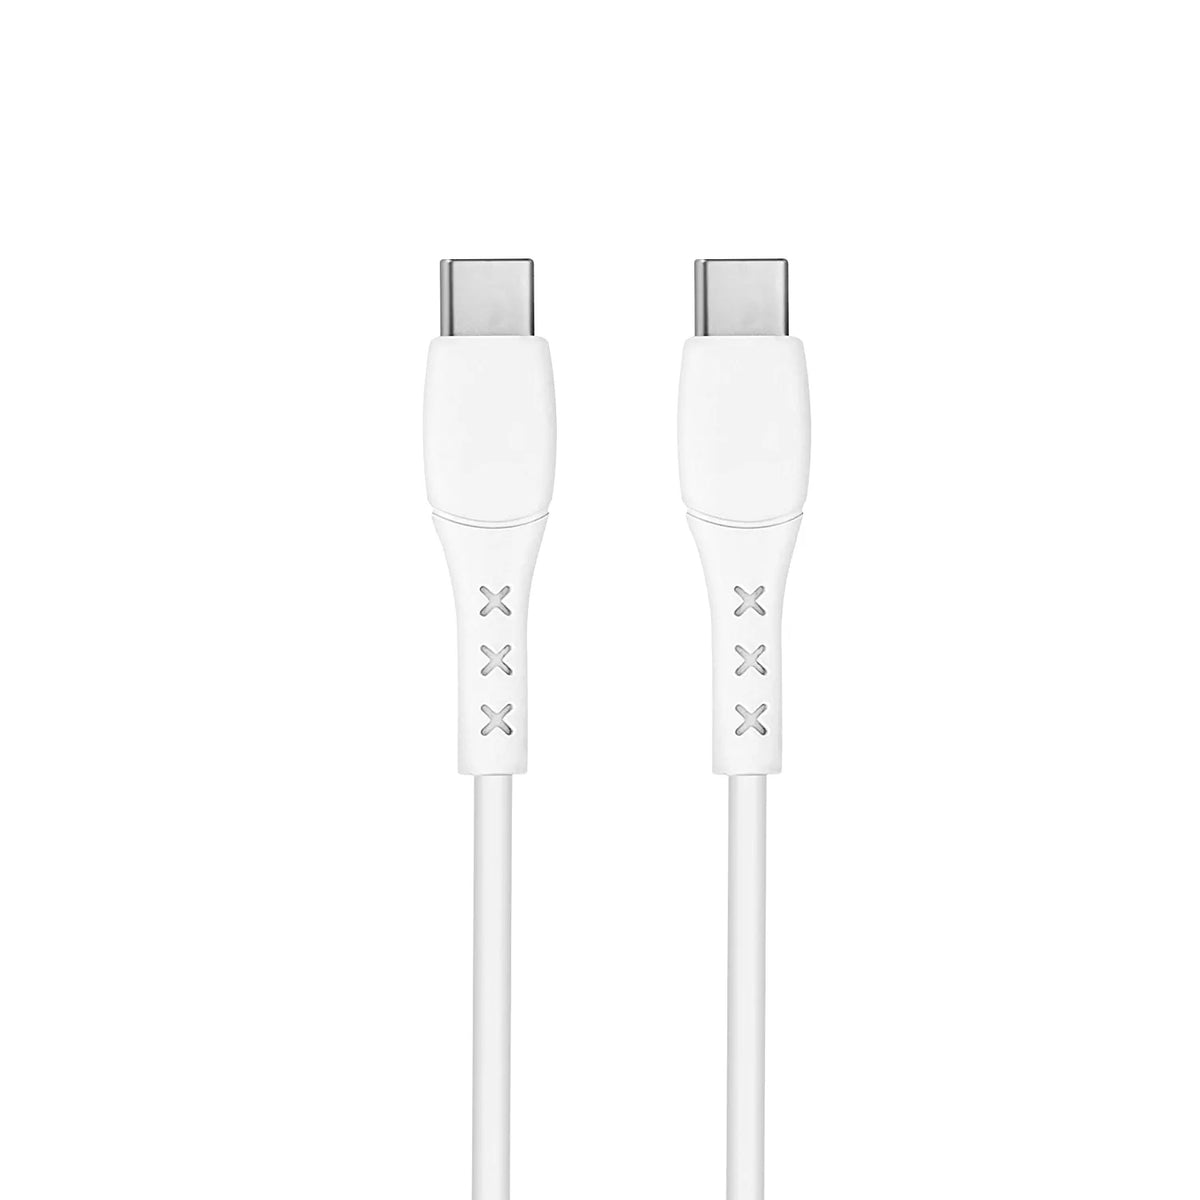 USB C to USB C Fast Charging Cable (60W~20/3A) Type C to Type C QC 3.0 Charging Cable (3.3 Feet Long, White)